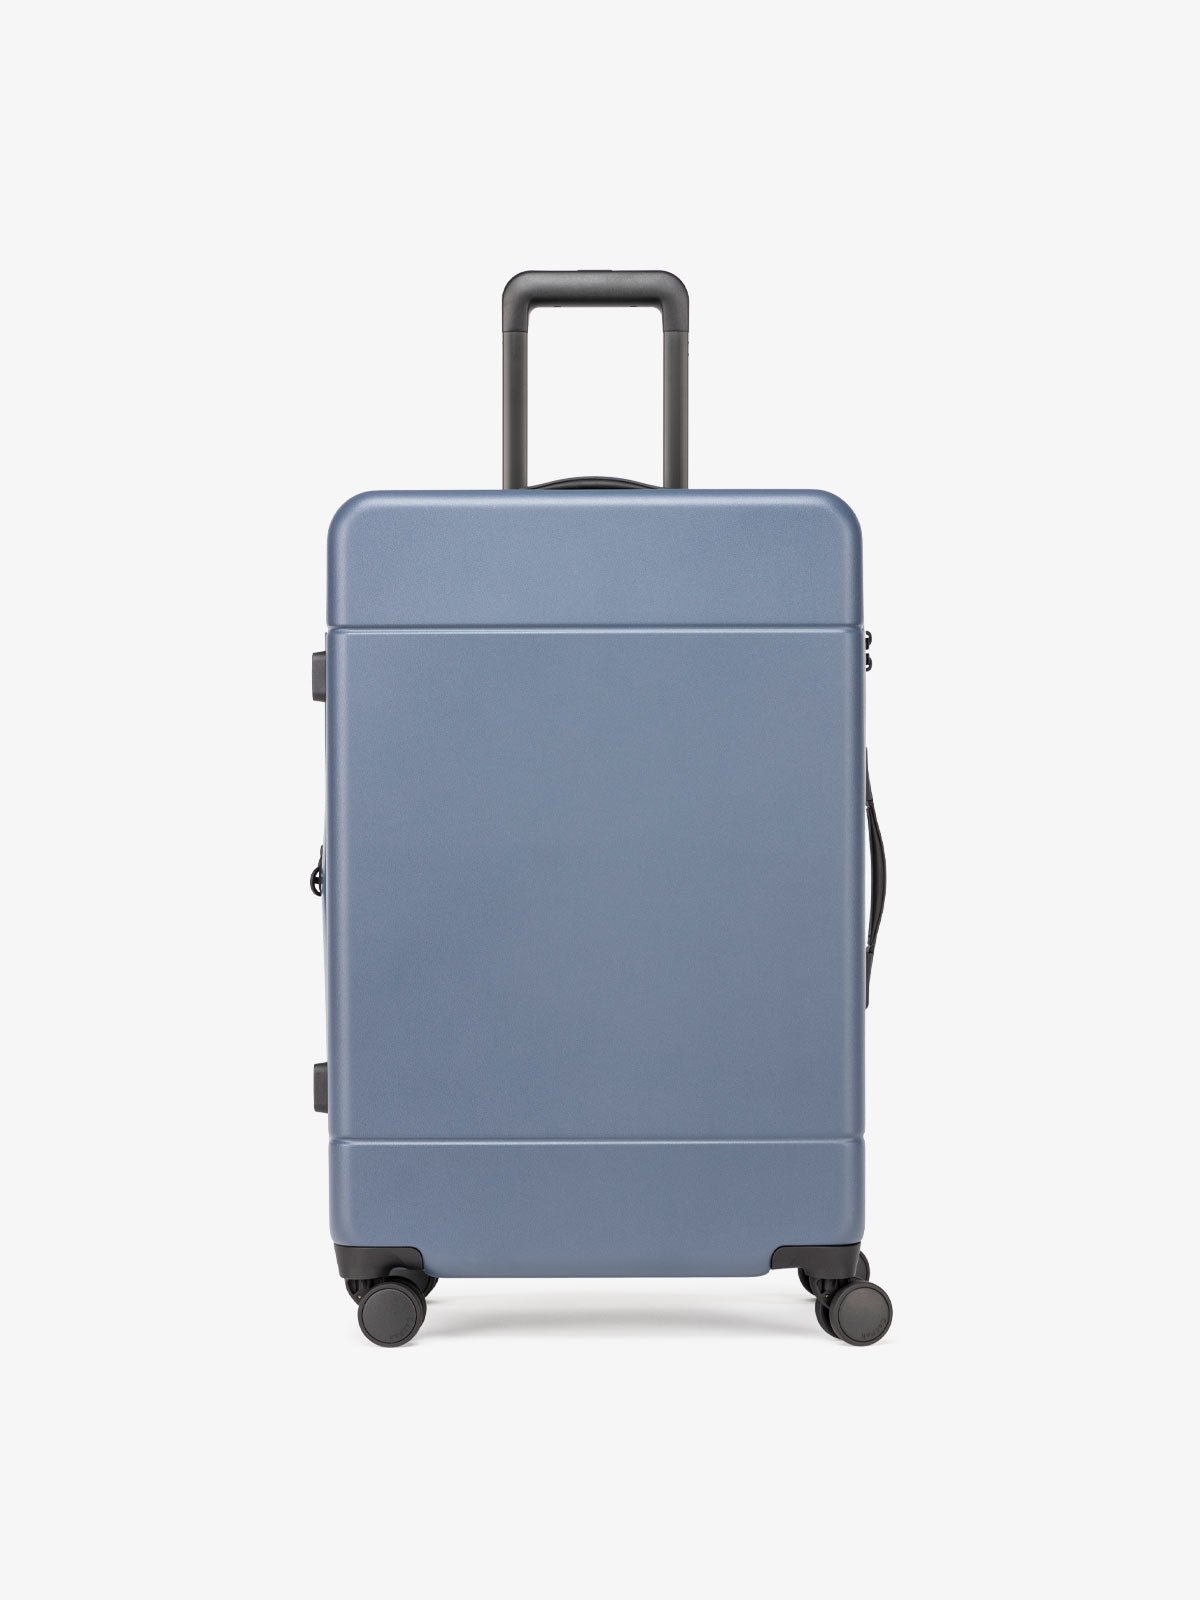 medium 26 inch hardside polycarbonate luggage in blue atlantic color from CALPAK Hue collection